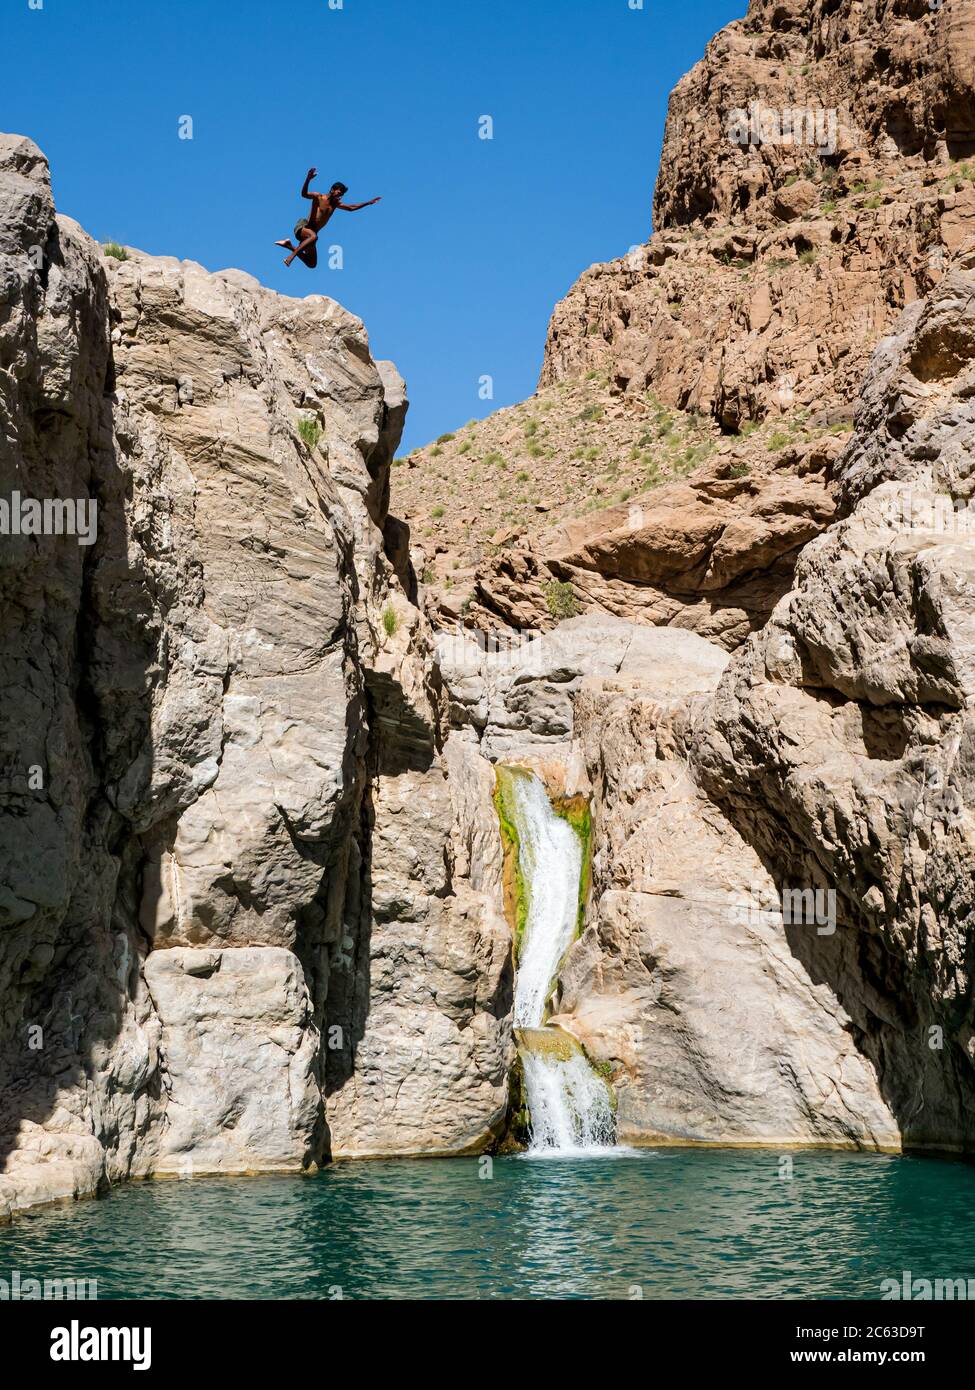 Young man leaping in to naturally formed swimming pools in Wadi Bani Khalid, Sultanate of Oman. Stock Photo